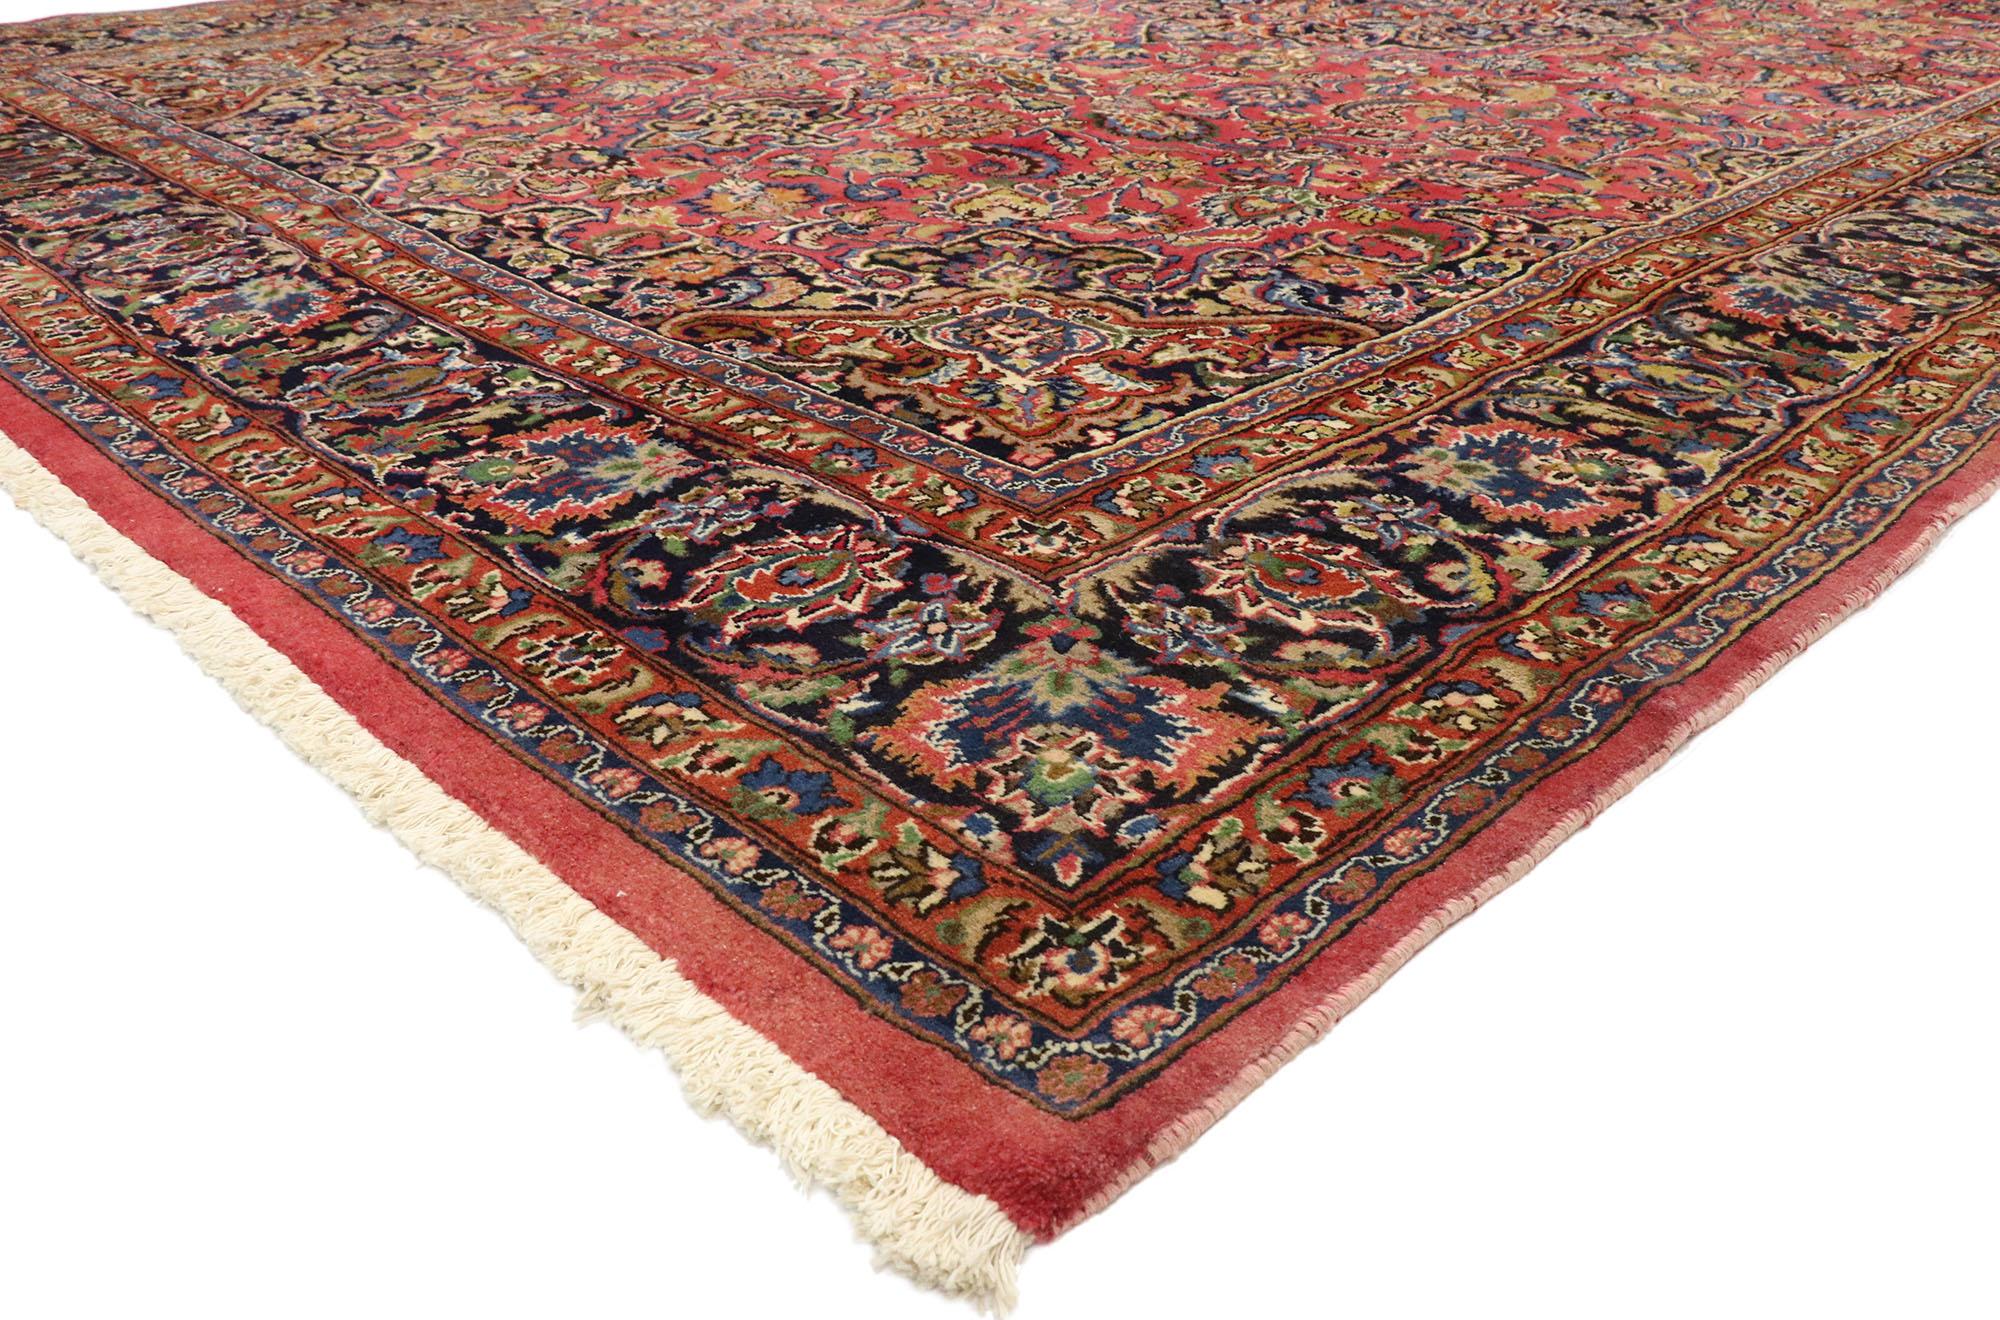 75202 Vintage Persian Mashhad Rug, 09'06 x 16'00. 
Rich in color, texture and beguiling ambiance, this hand-knotted wool vintage Persian Mashhad rug beautifully displays timeless elegance and regal charm. A stunning testament to traditional Persian